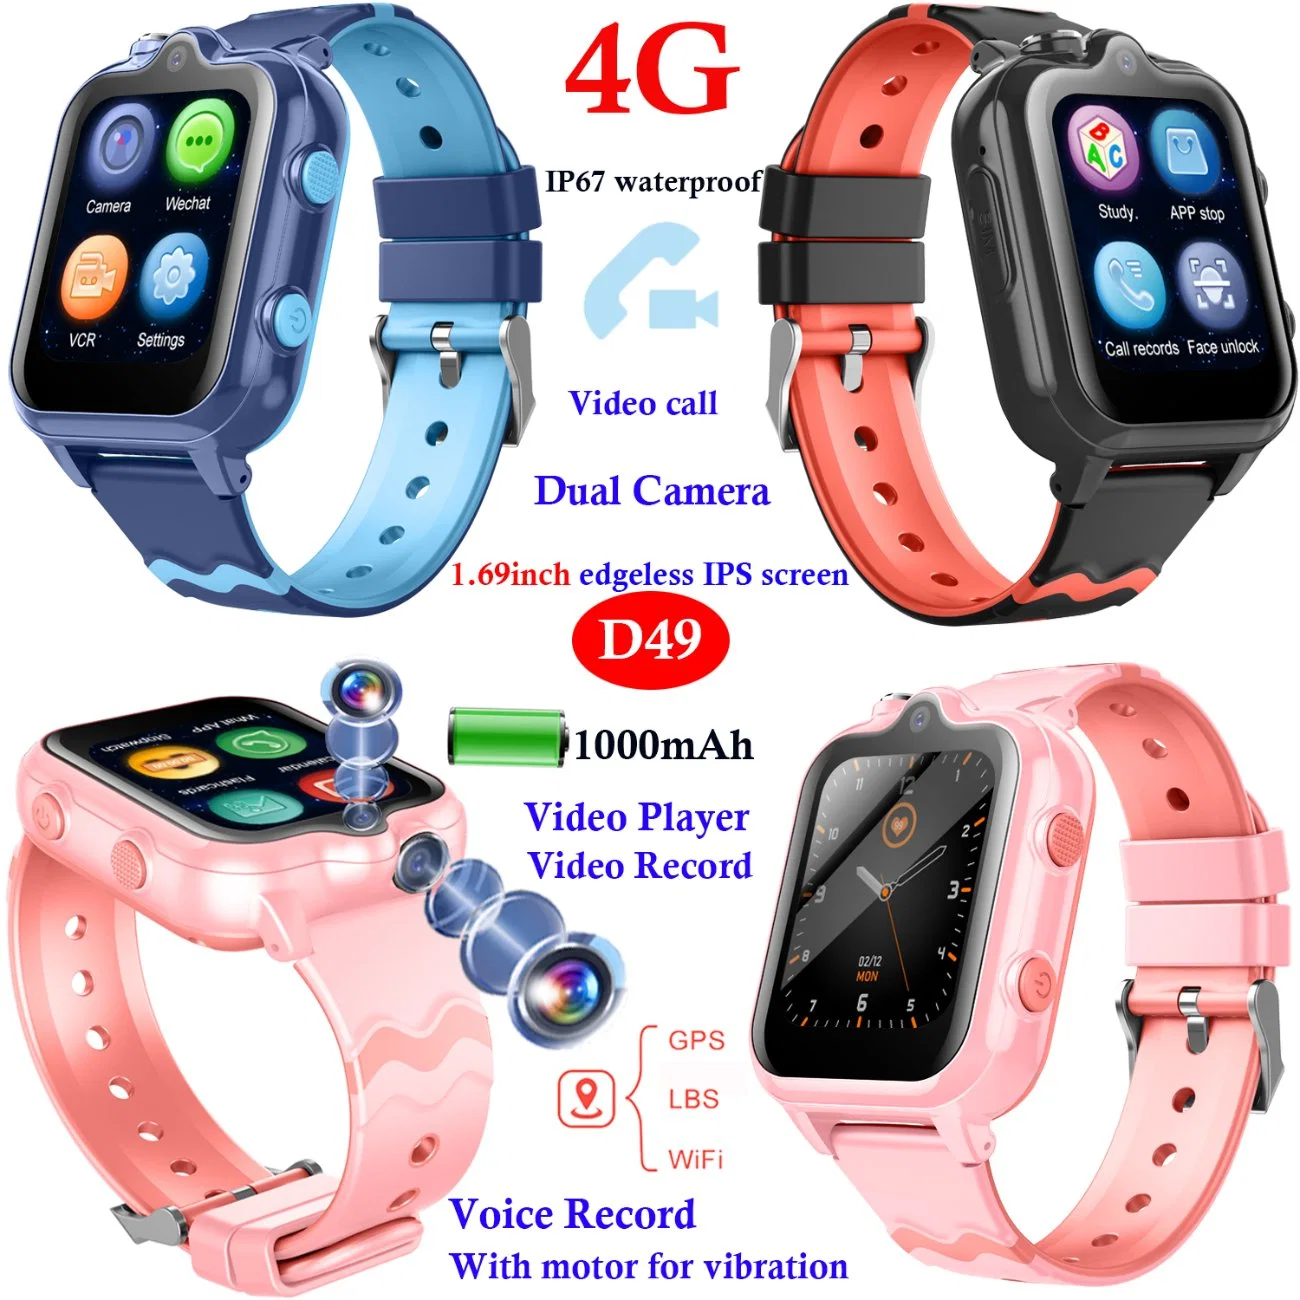 2023 Newest high quality 4G waterproof Video call Kids Smart GPS Watch Phone for Children Safety GPS Location Dual Camera D49